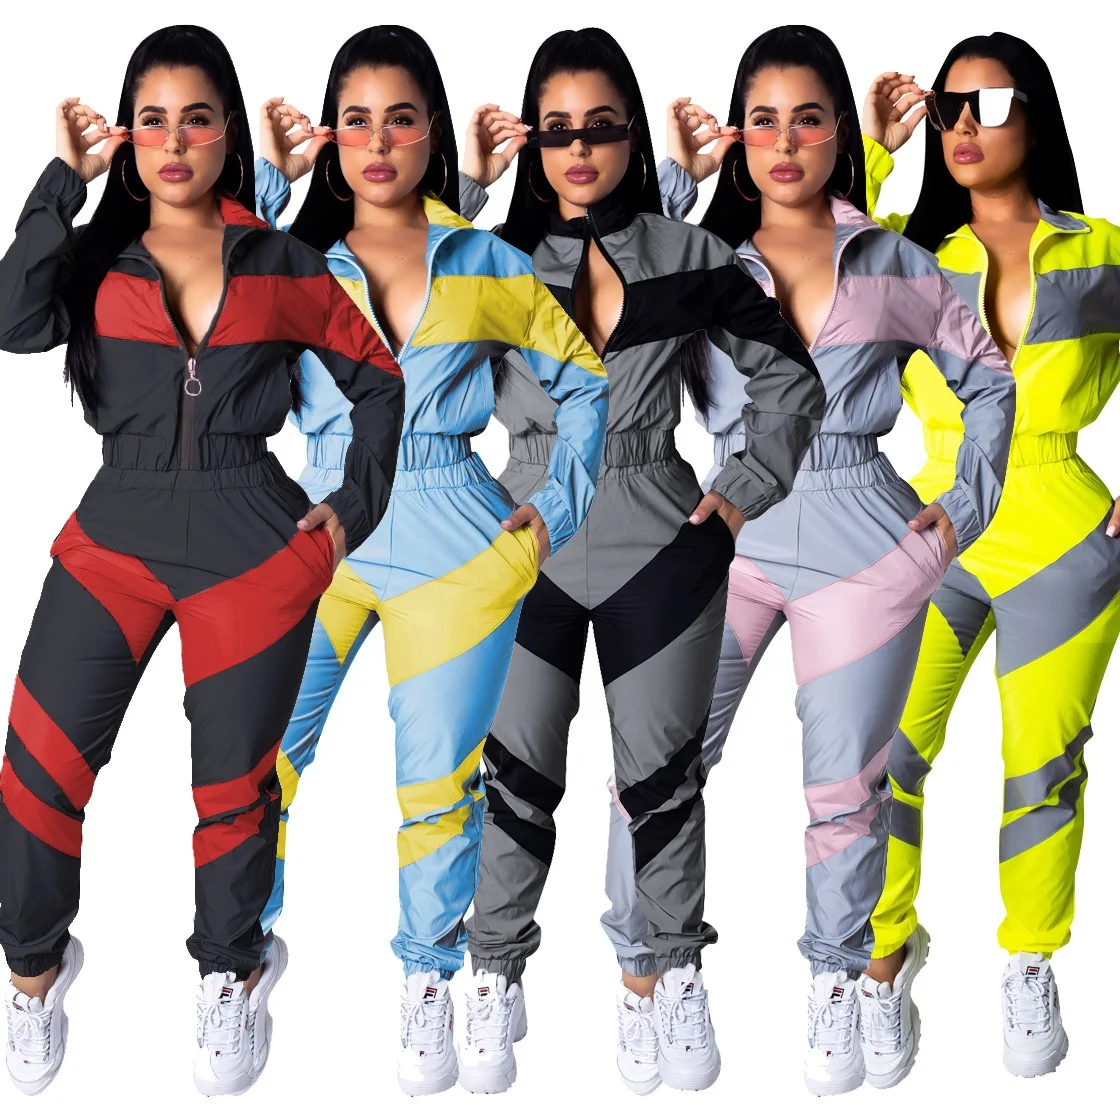 

Wholesale Autumn Fashion Custom Women Two Piece Set Outfits Fitness Jogging Tracksuits, Available